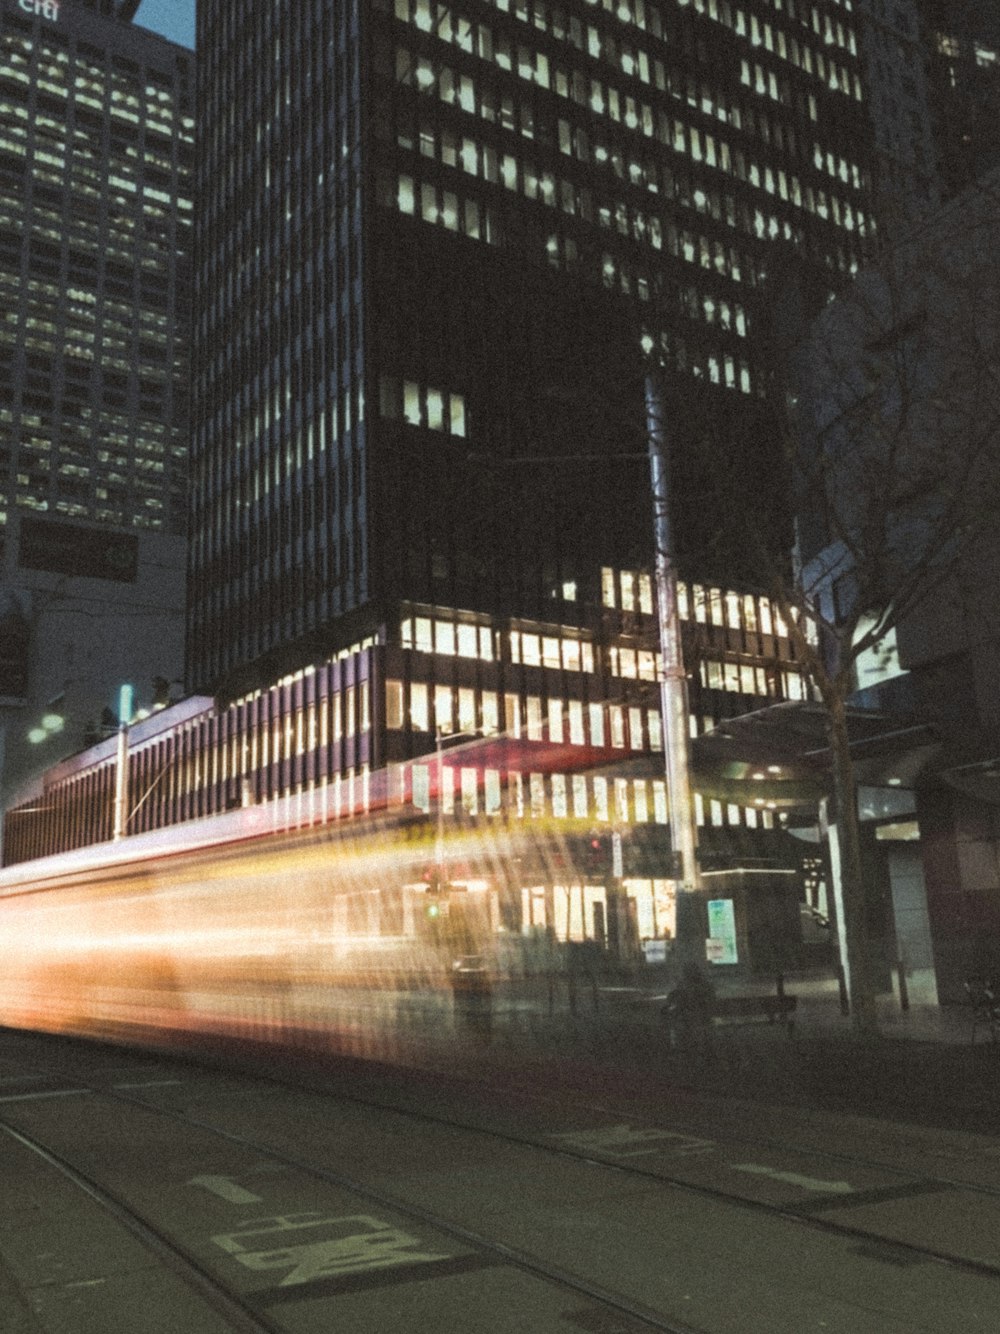 a long exposure photo of a train in the city at night